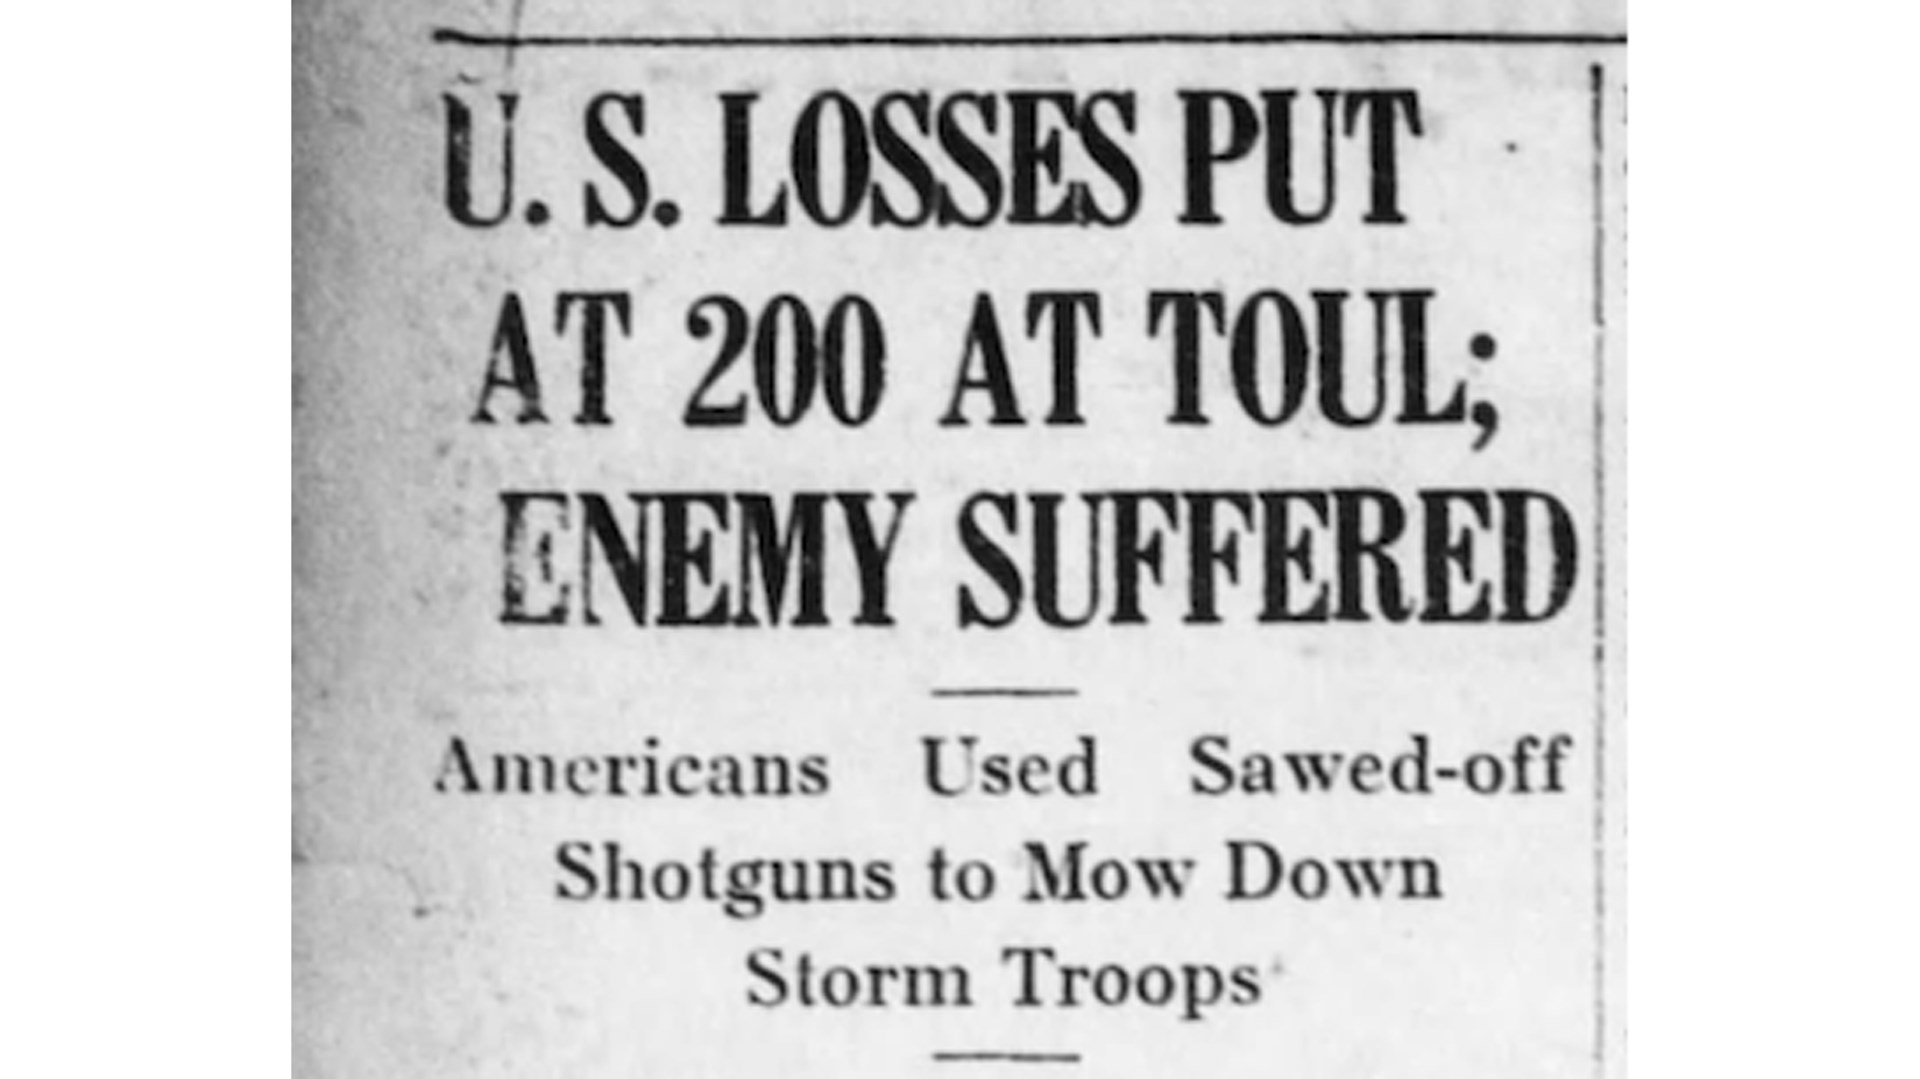 The U.S. press claimed that shotguns had been successfully used in combat as early as April 1918, over two months before the official combat trials took place. There appears to be no official record of this event.